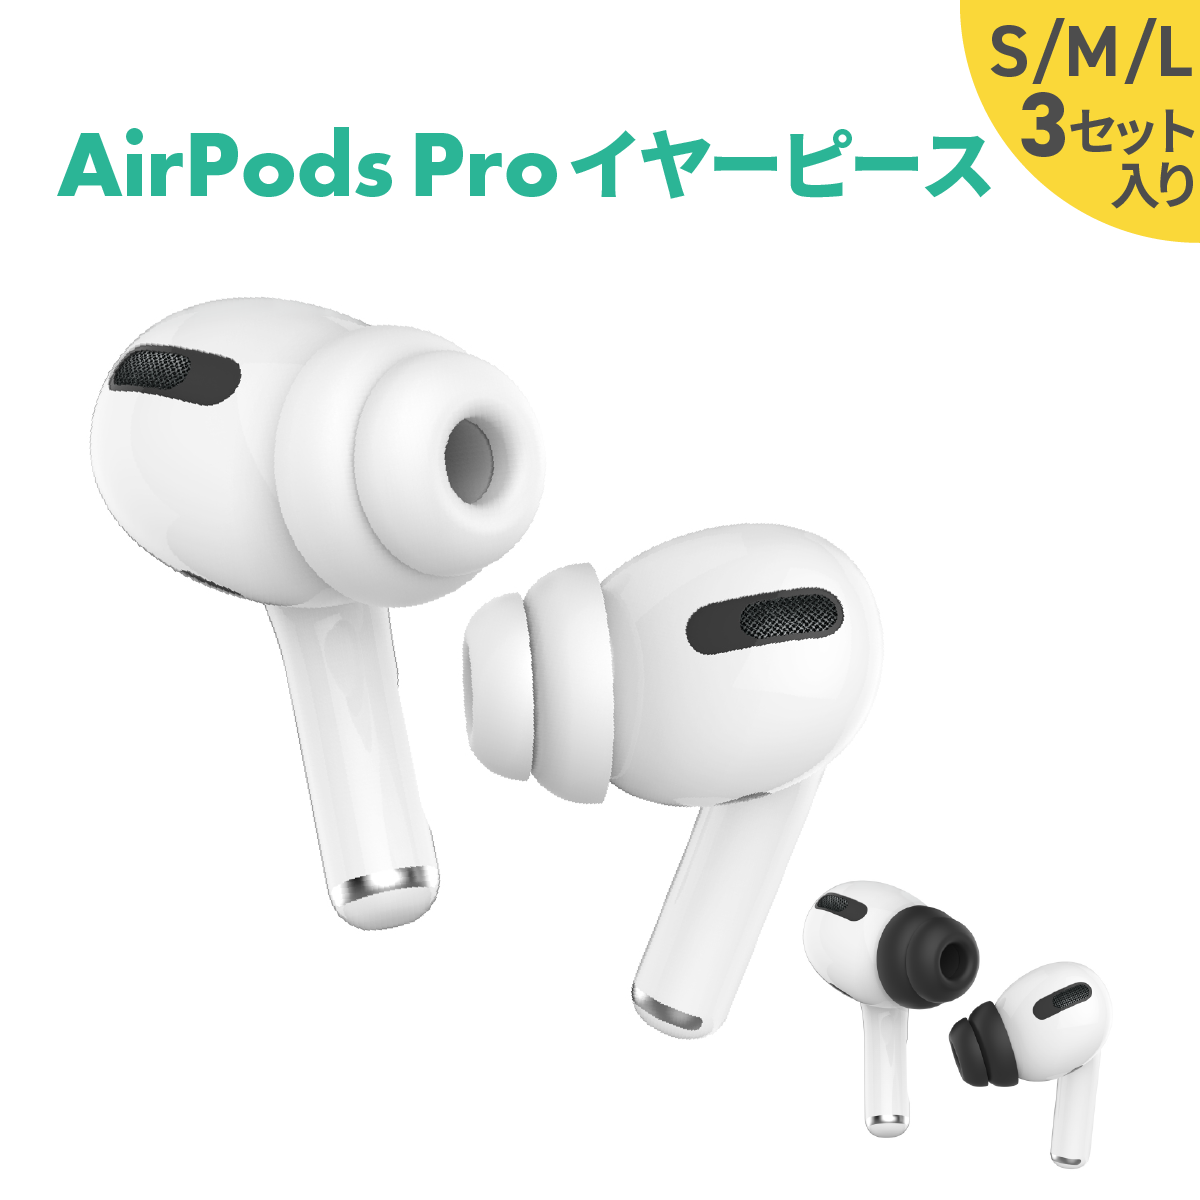 AirPods Pro✖︎3